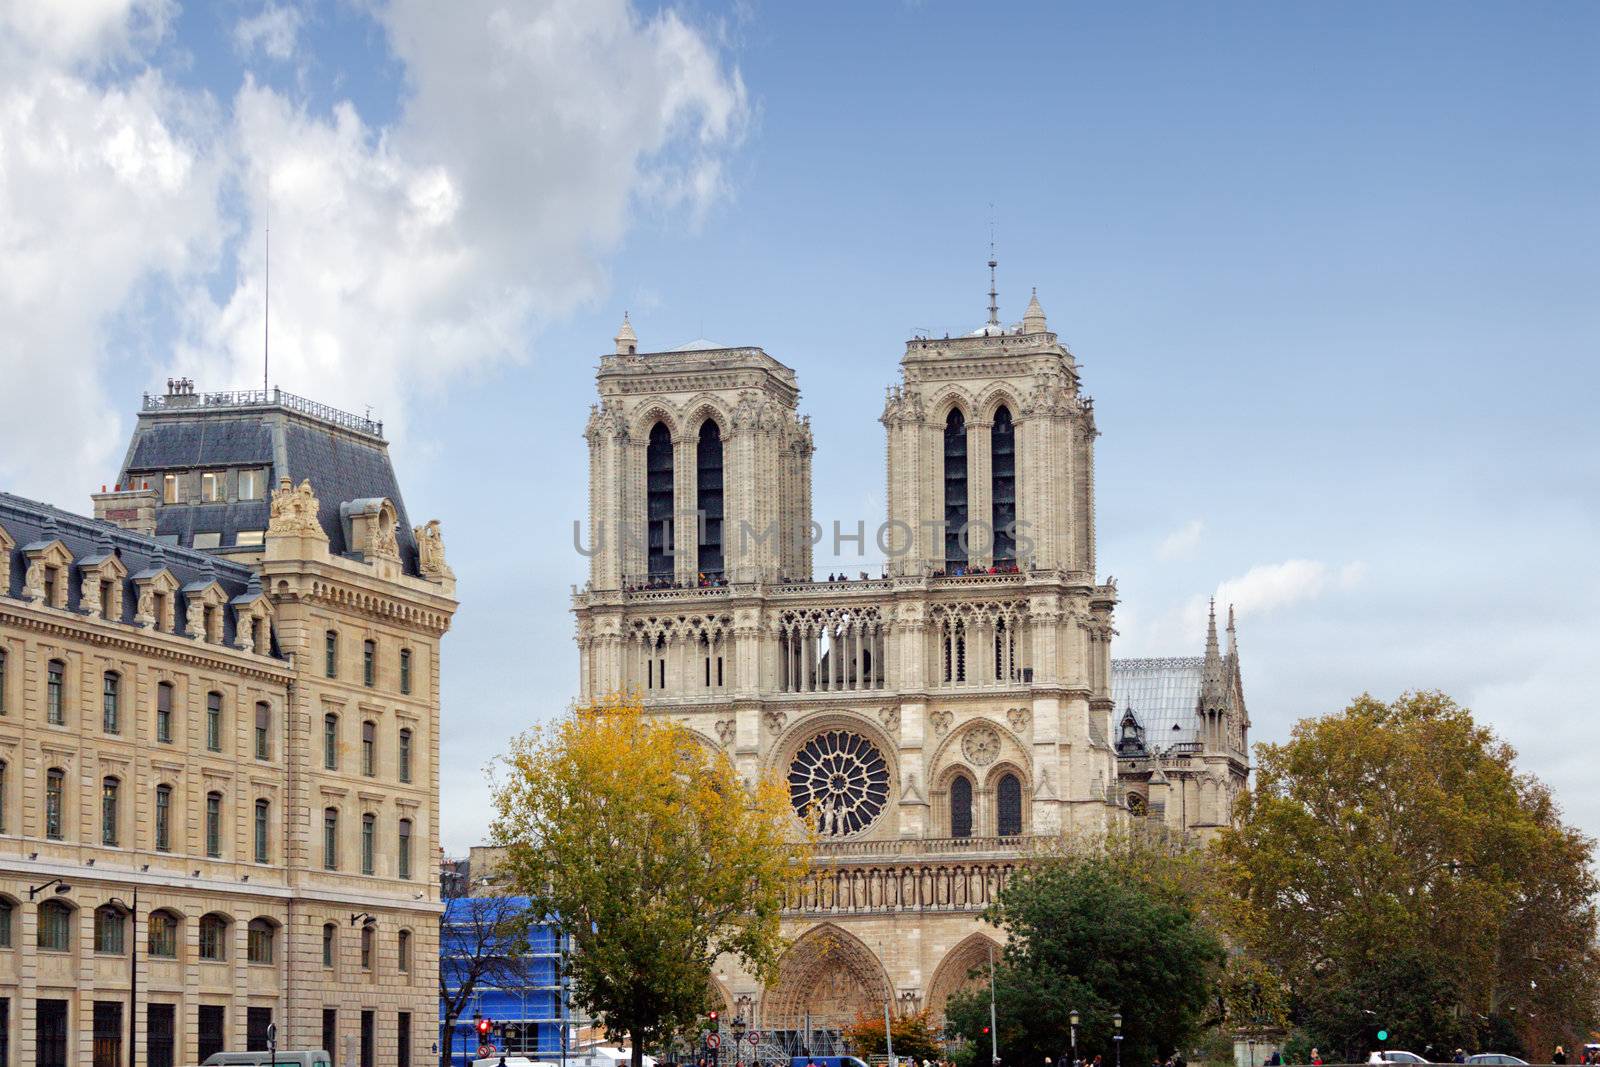 The Notre Dame Cathedral, Paris, France